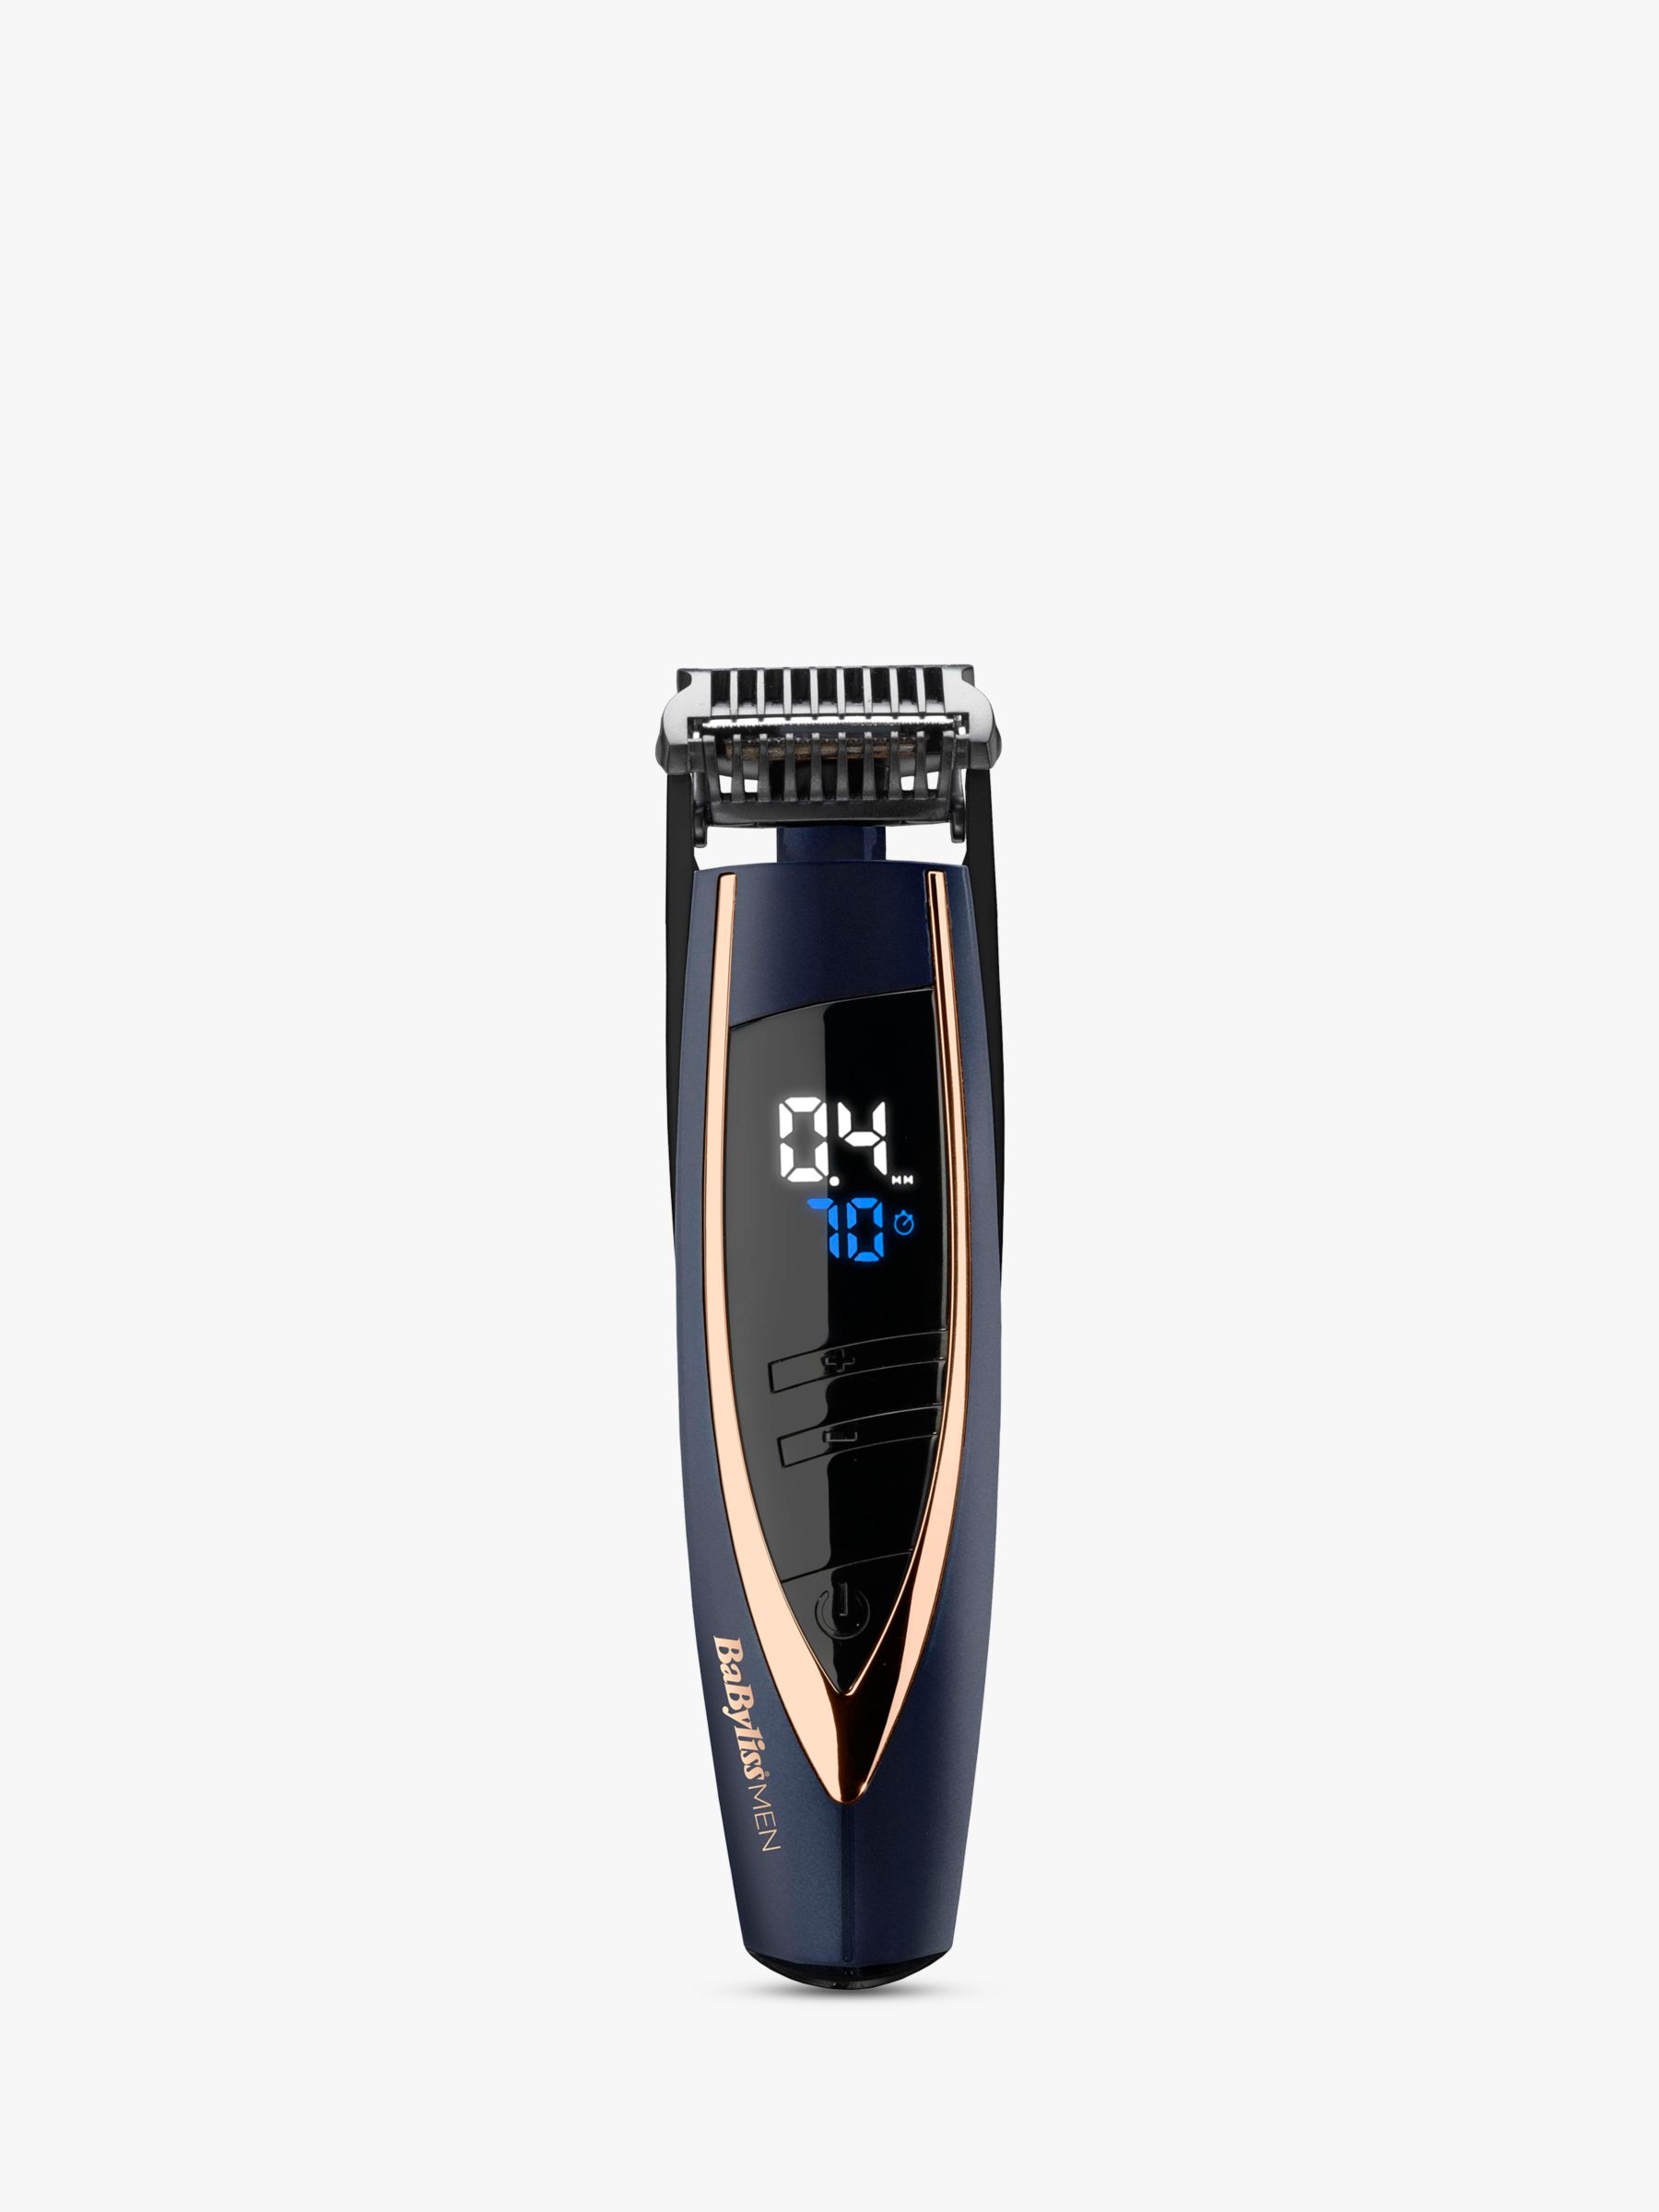 best hair clippers for cutting your own hair